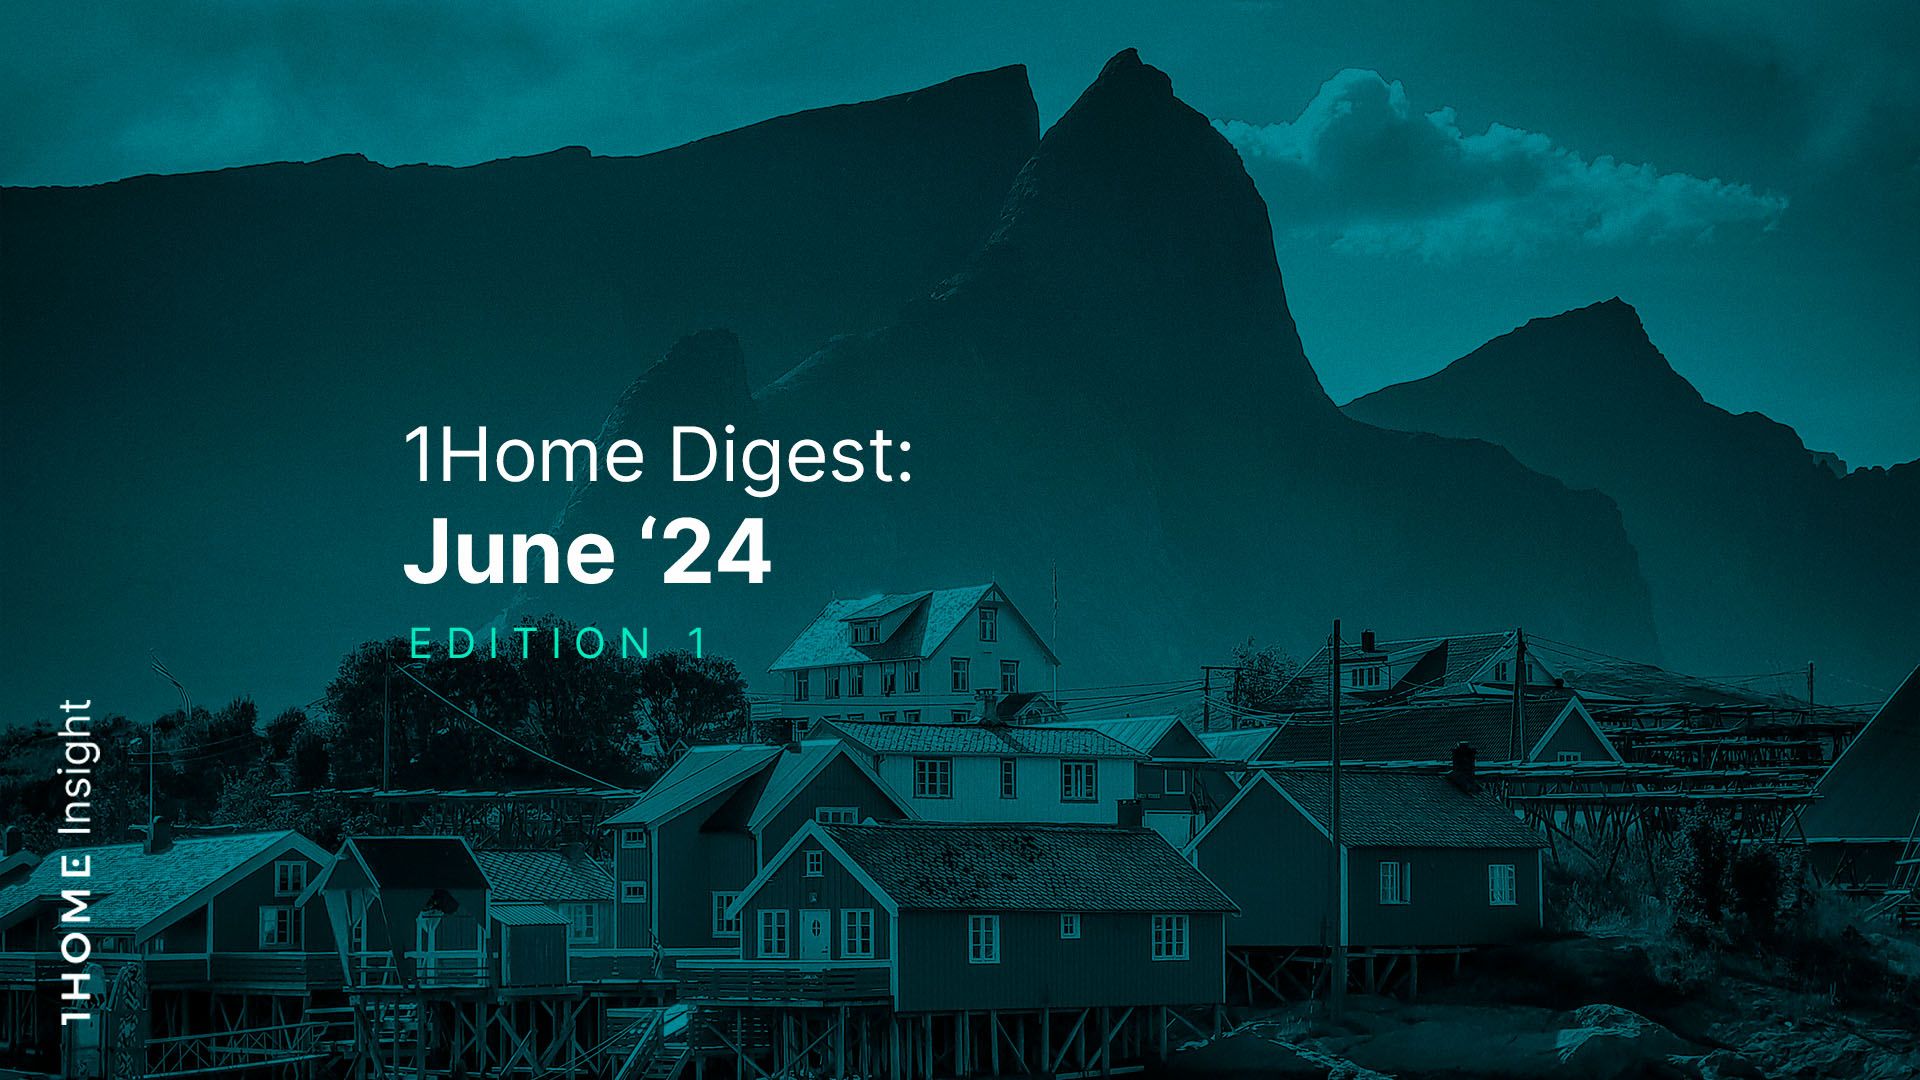 1Home Digest: June '24 Edition 1